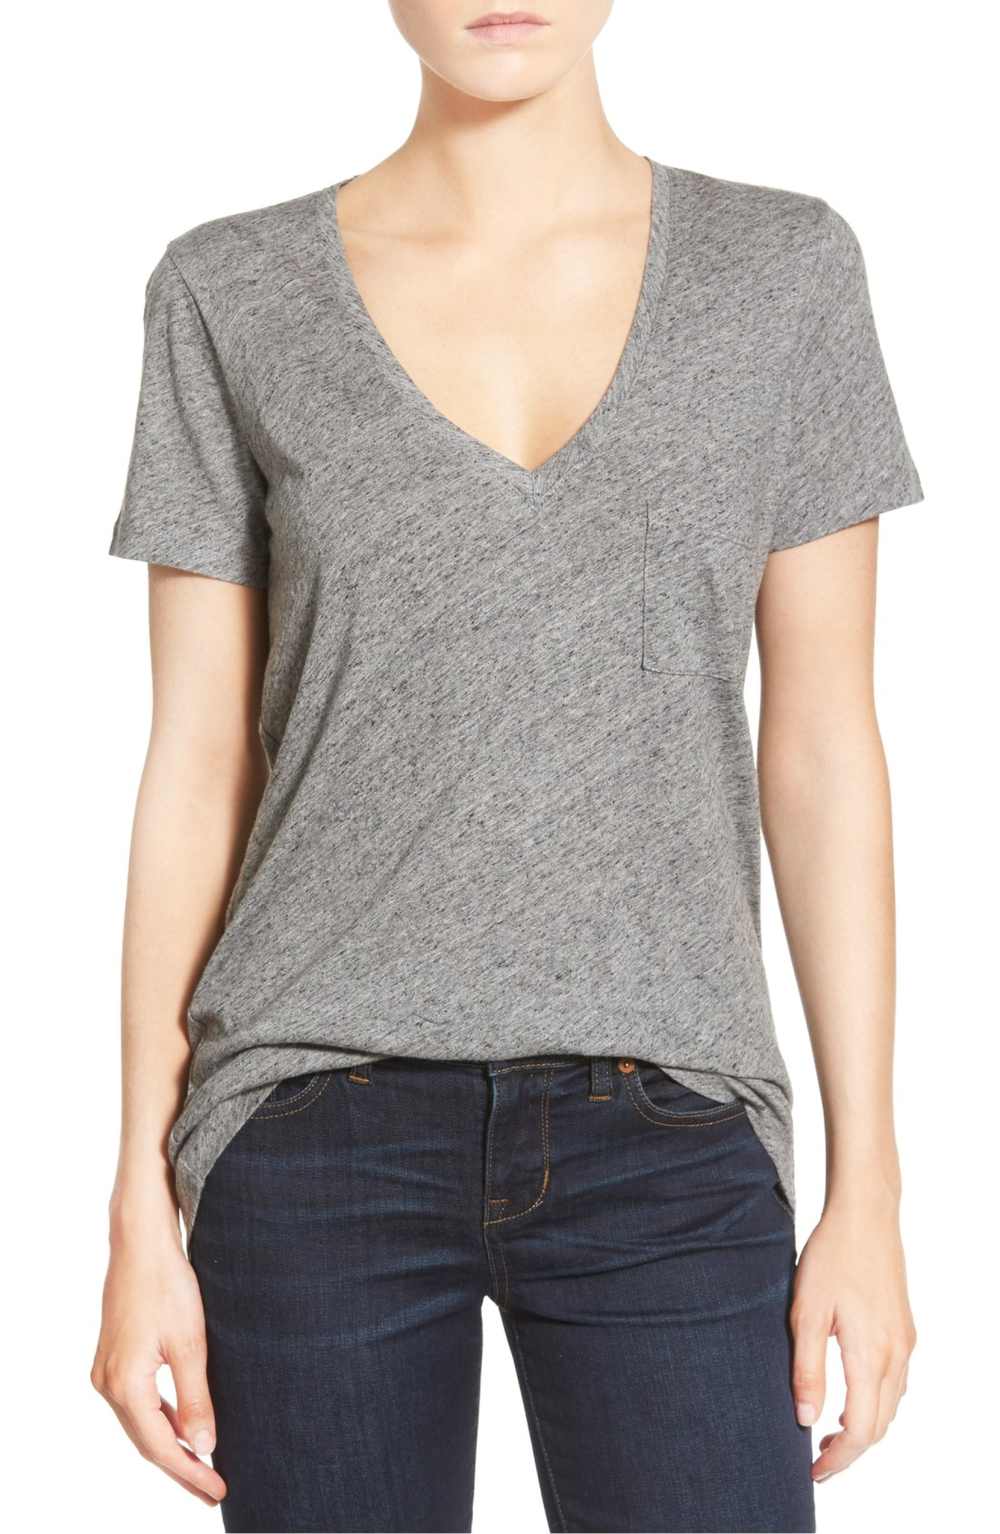 Best Top-Rated Soft Tee Under $20 | Us Weekly